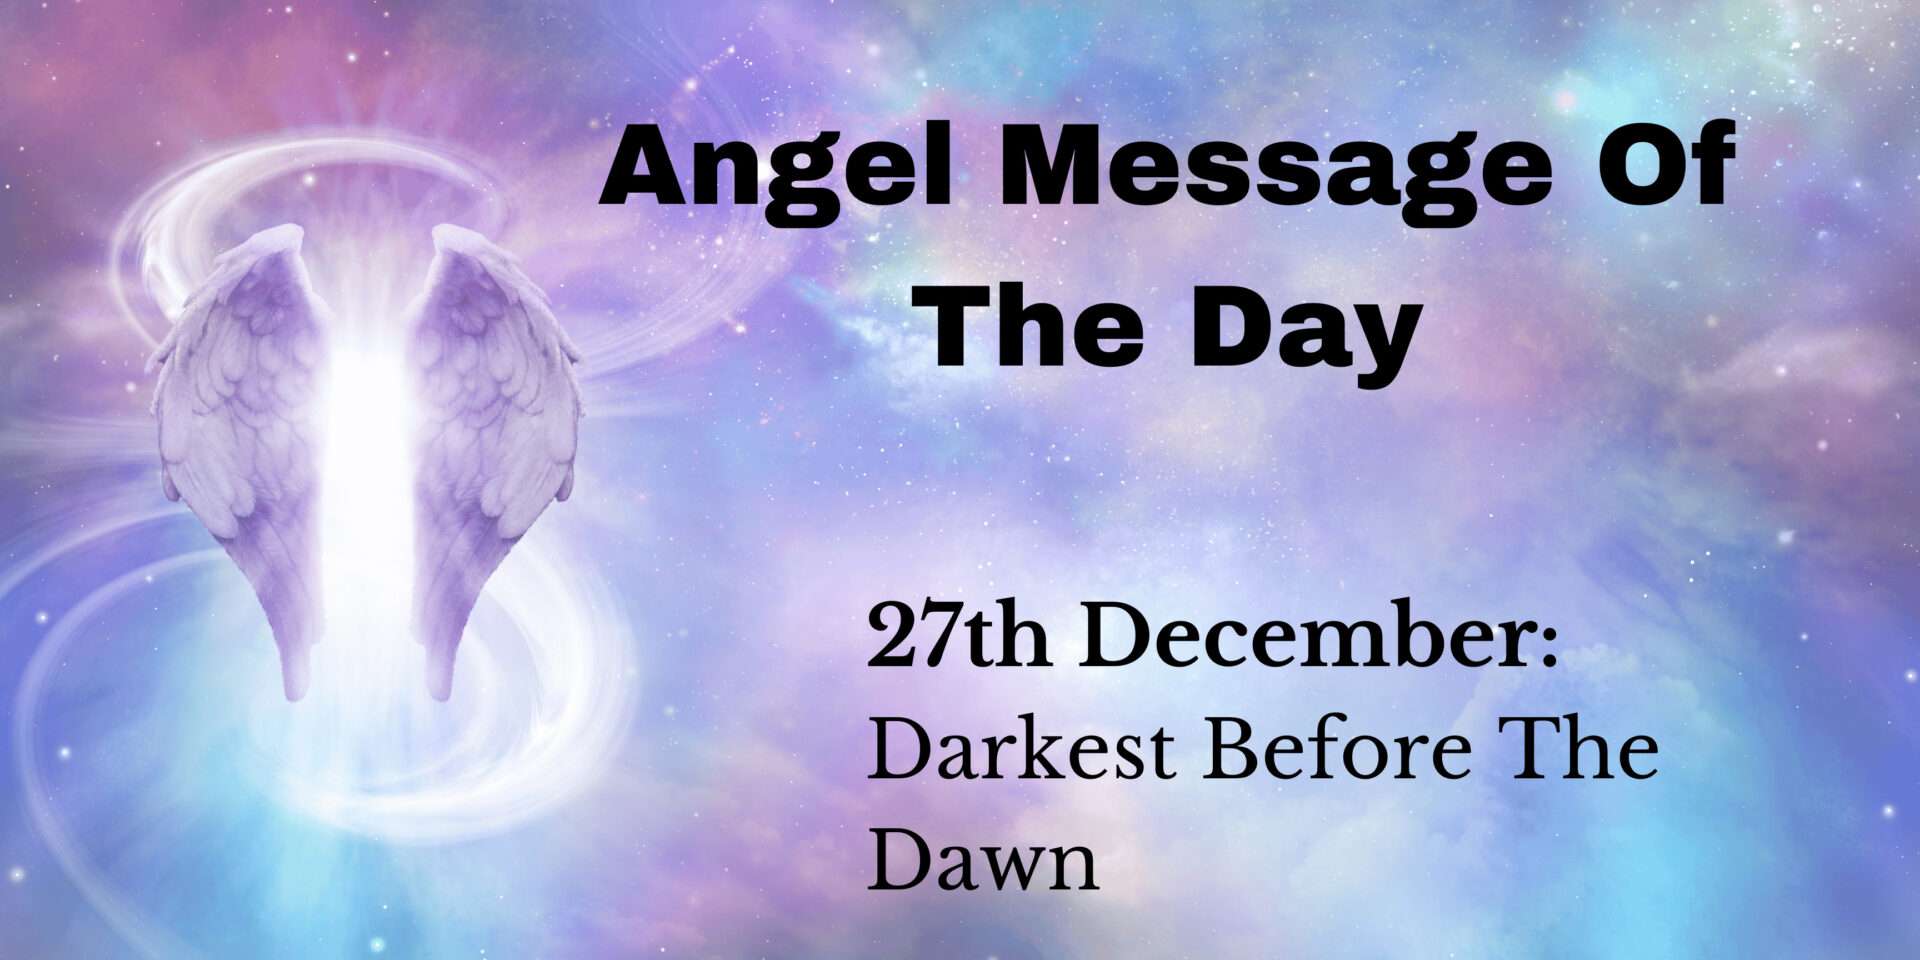 angel message of the day : darkest before the dawn